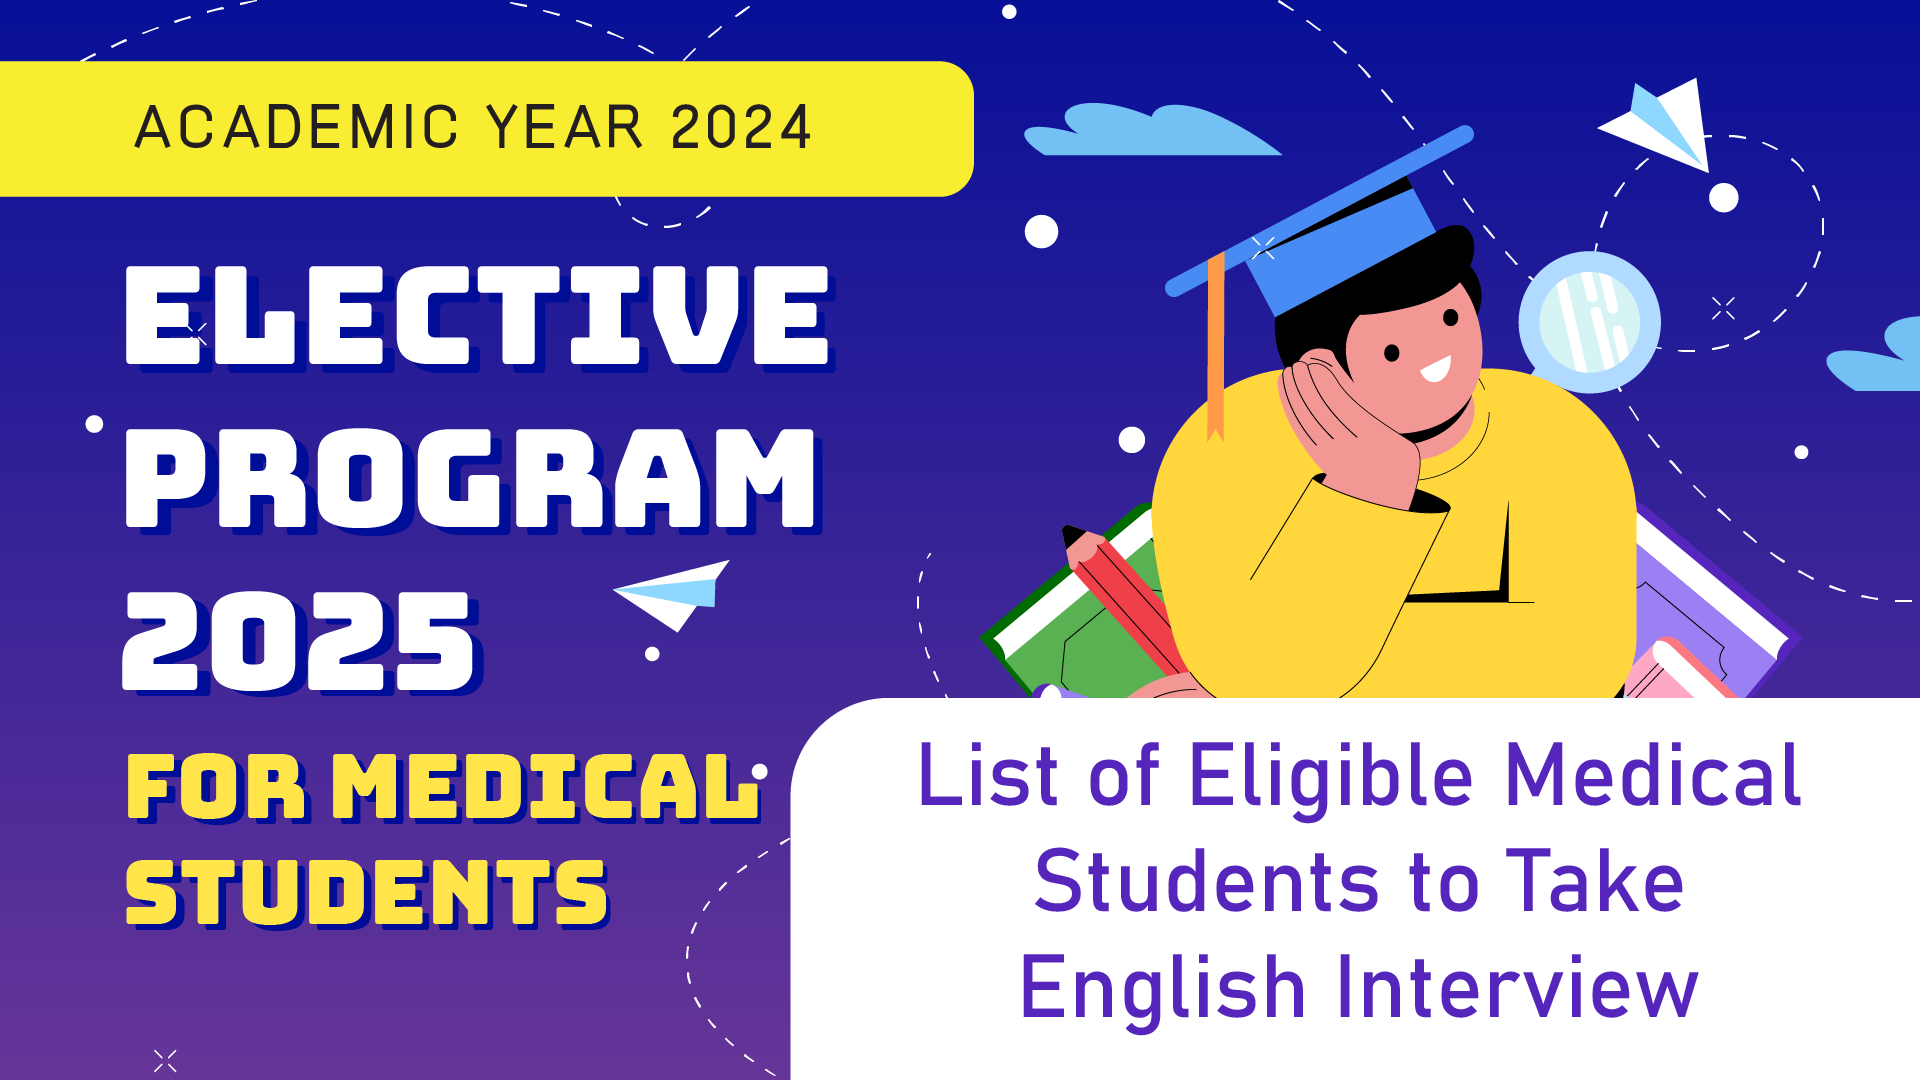 List of Eligible Medical Students to Take English Interview